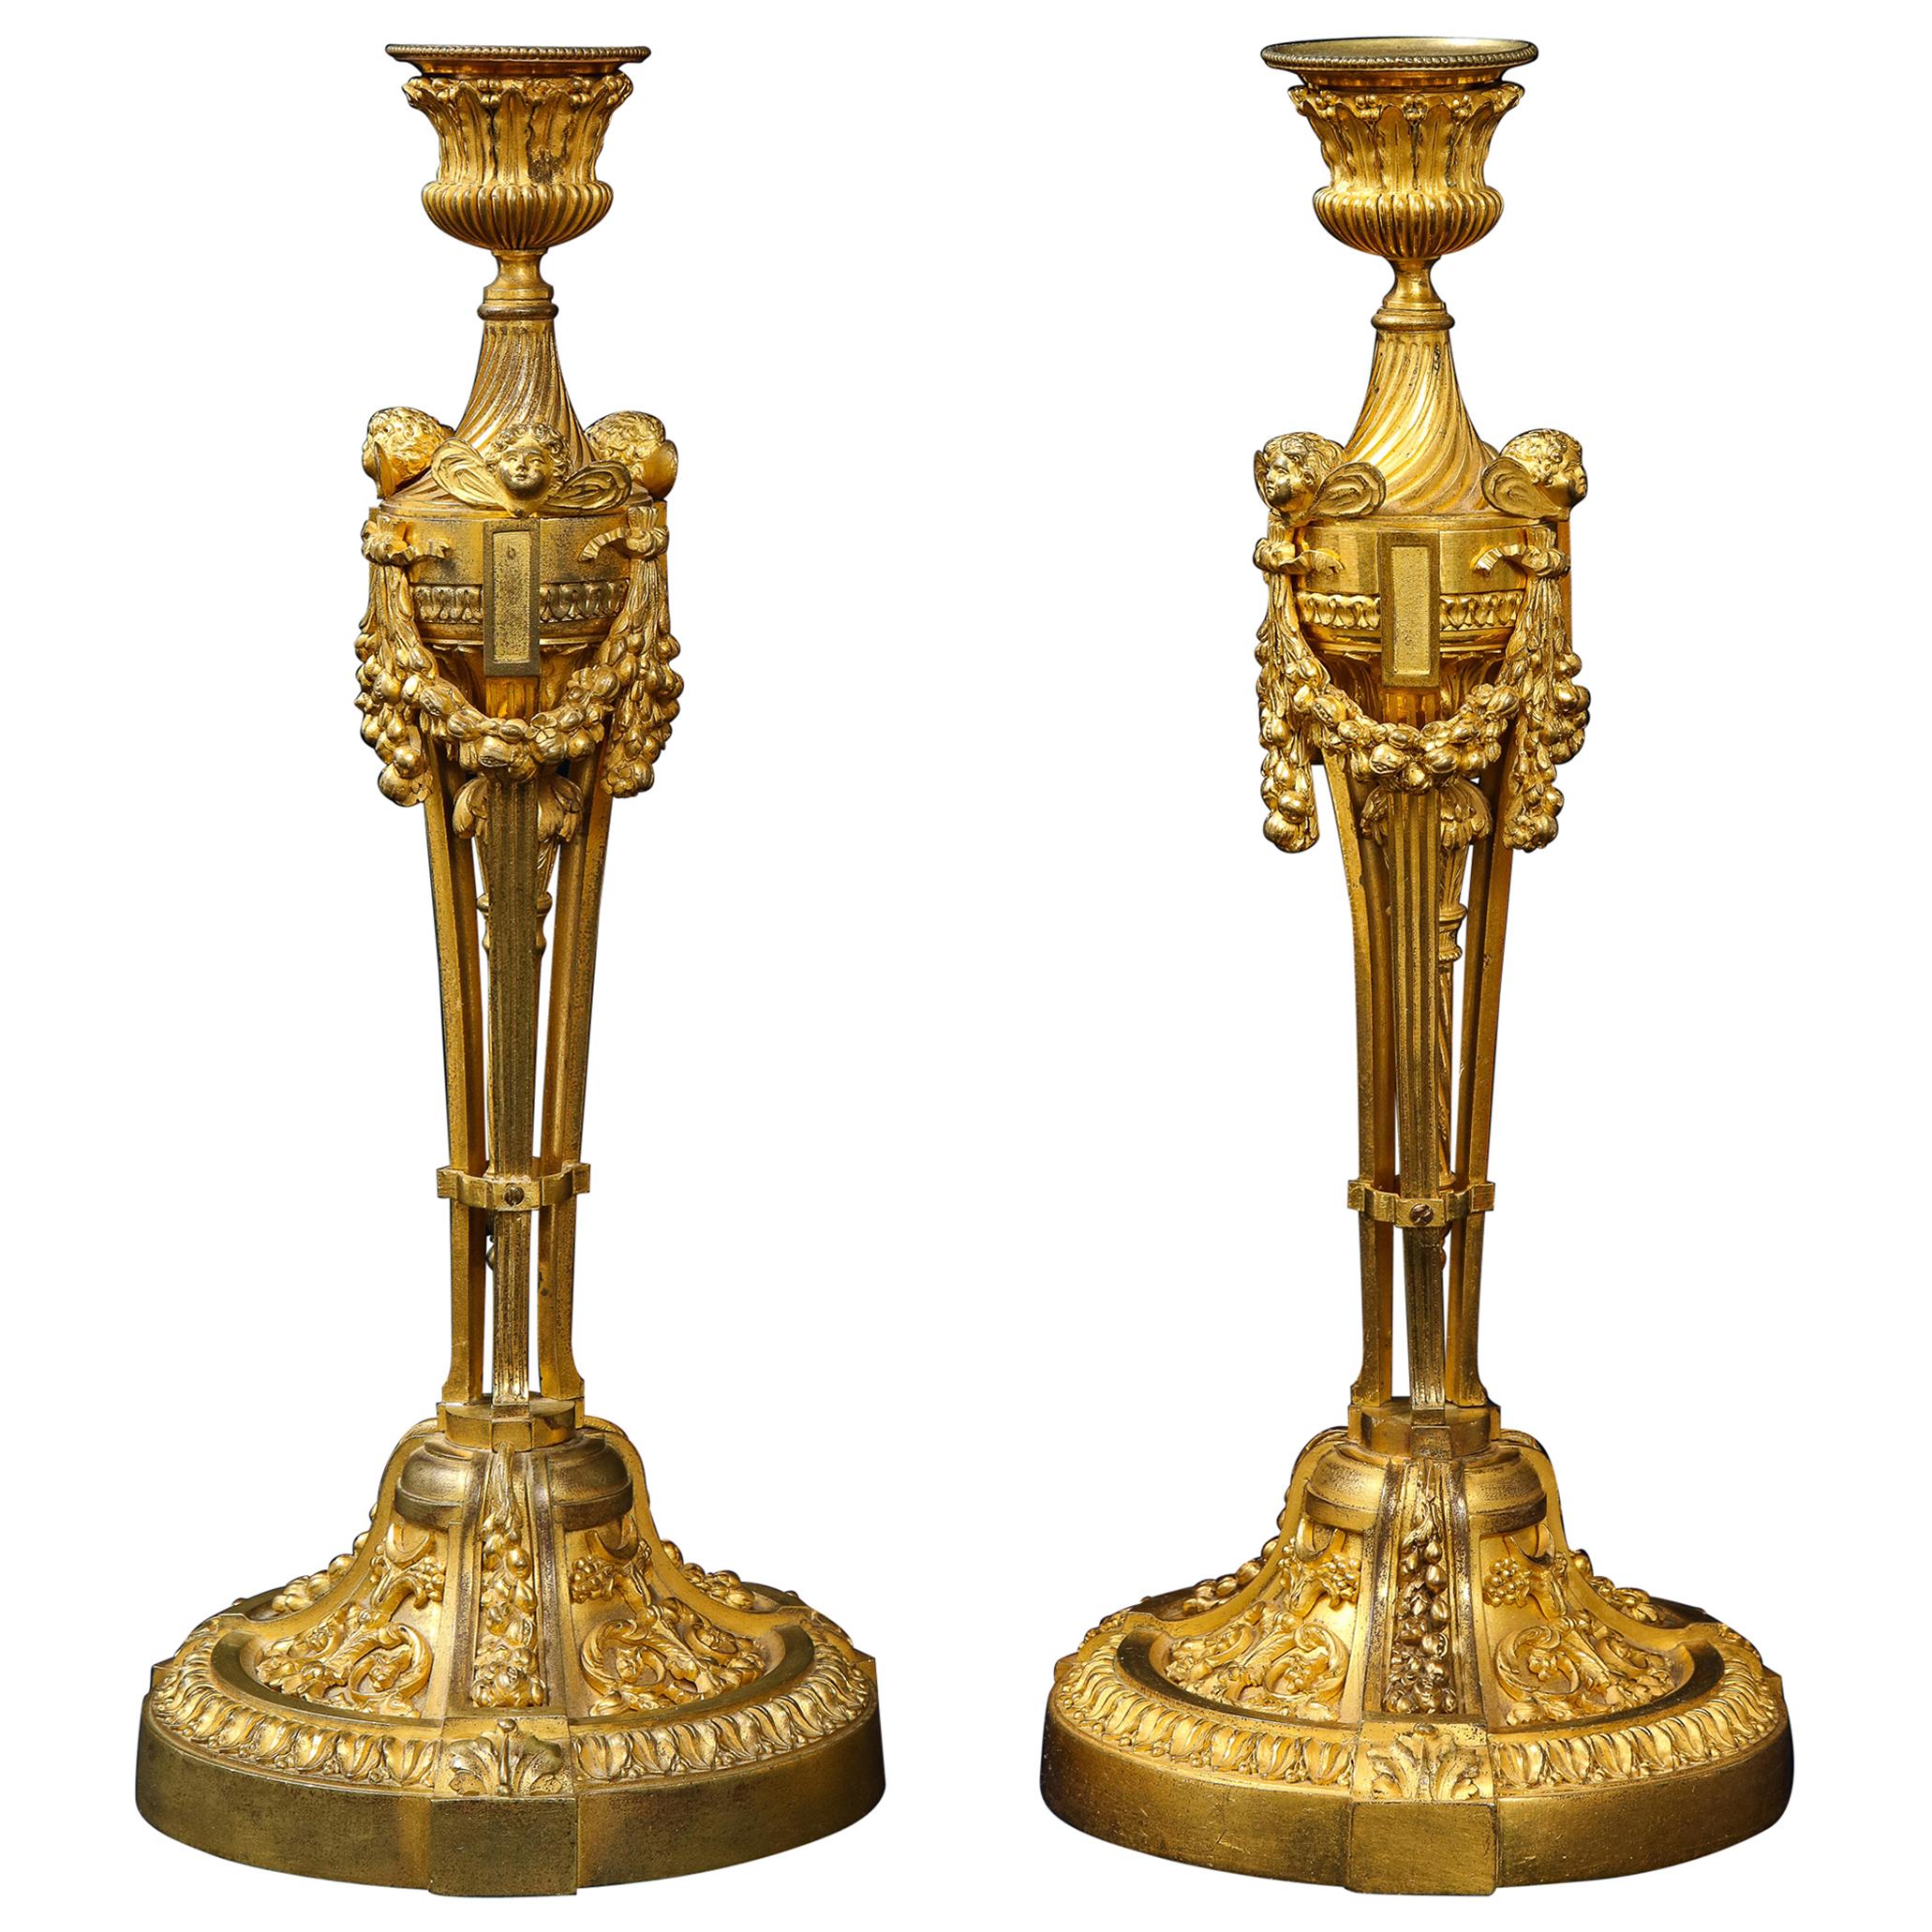 Pair of French Louid xvi Ormolu Candlesticks with Putti Masks and Garlands